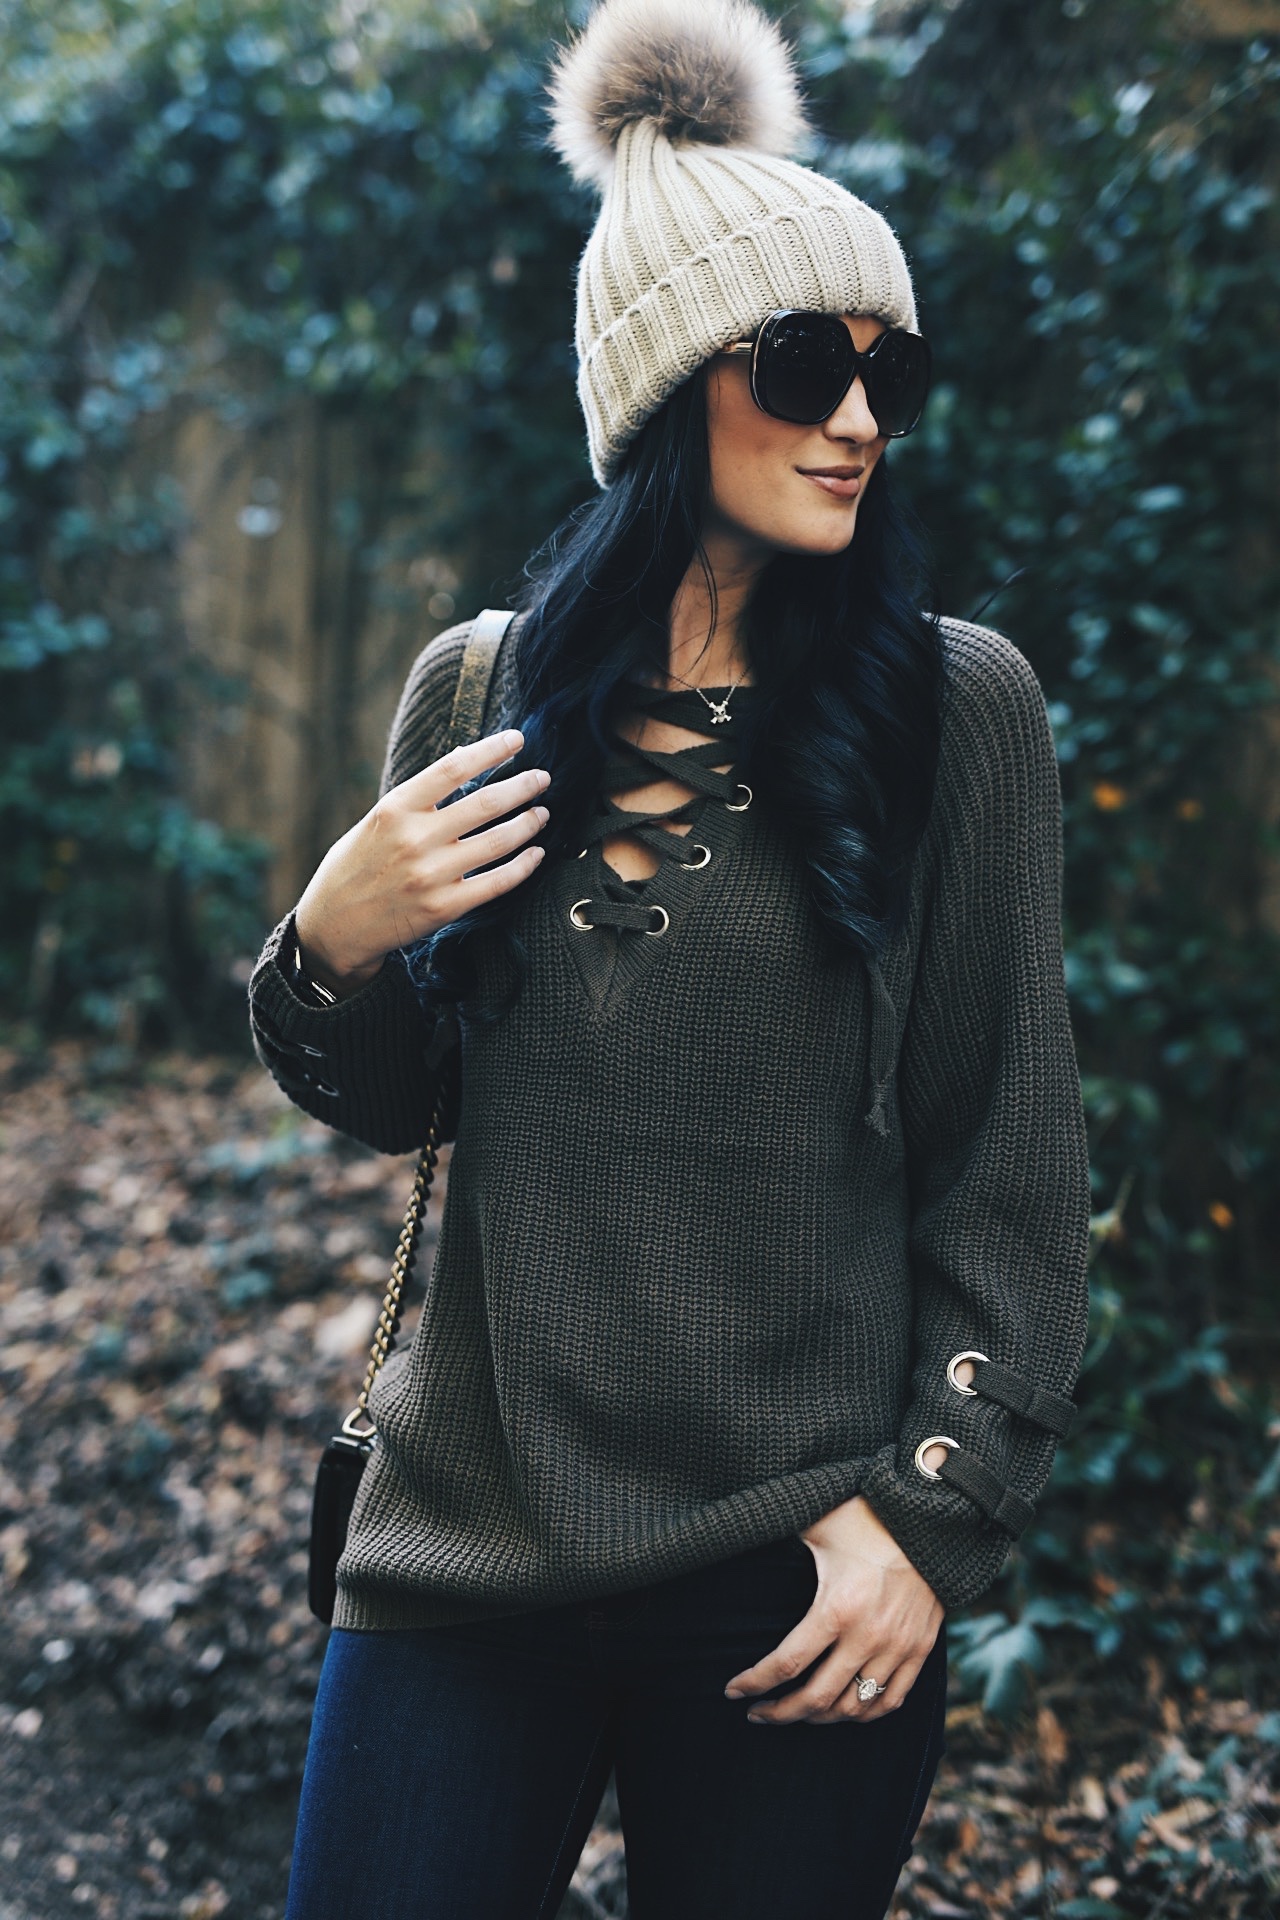 DTKAustin is sharing her fave olive green lace up sweater from Honeybum. Use code DTK20 for 20% your entire order. Bang - Chanel, Booties - Lucky Brand | olive green lace up fall sweater | how to style a lace up sweater | fall sweater fashion | fall fashion tips | fall outfit ideas | fall style tips | what to wear for fall | cool weather fashion | fashion for fall | style tips for fall | outfit ideas for fall || Dressed to Kill #fallstyle #fallsweaters #laceupsweater 